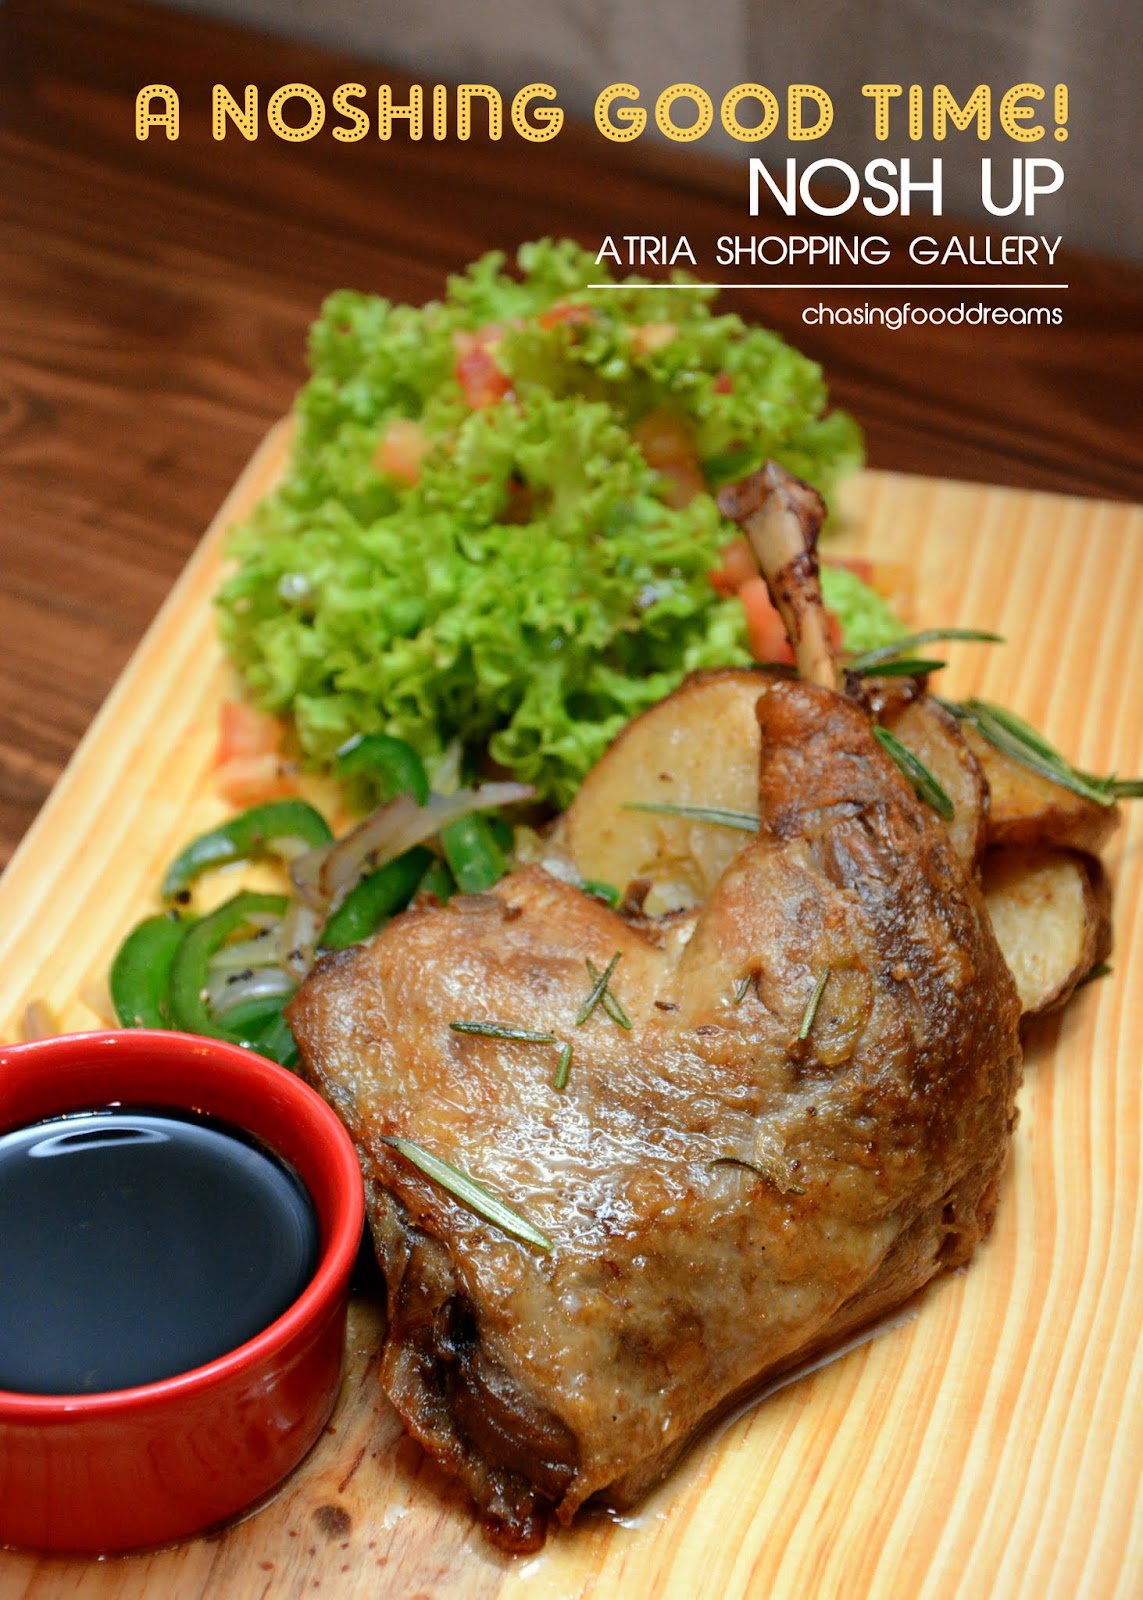 CHASING FOOD DREAMS: Nosh Up @ The Atria Shopping Gallery